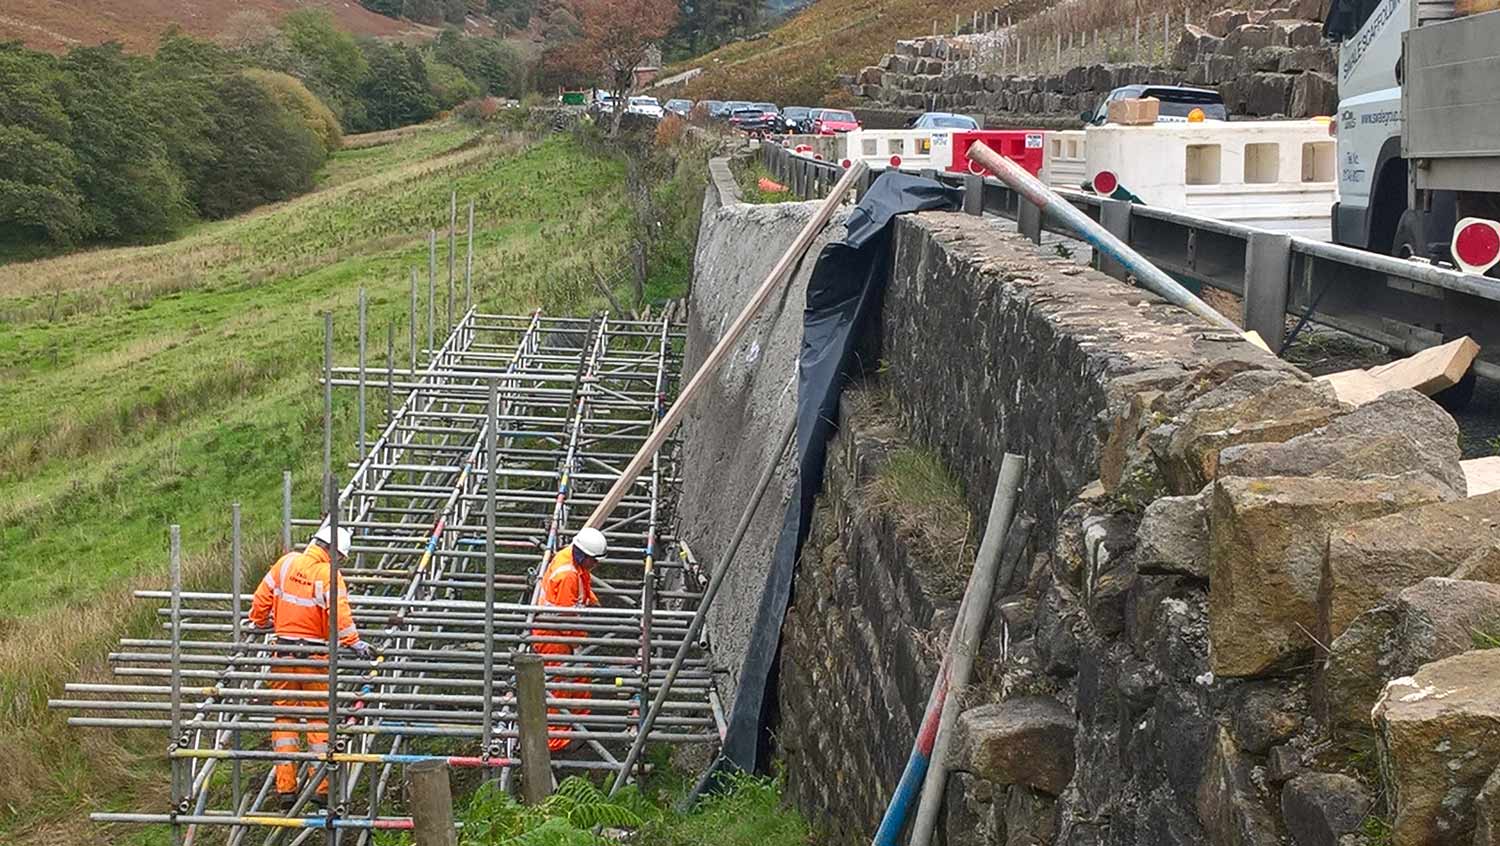 A59 at Kex Gill expected to reopen fully before Christmas